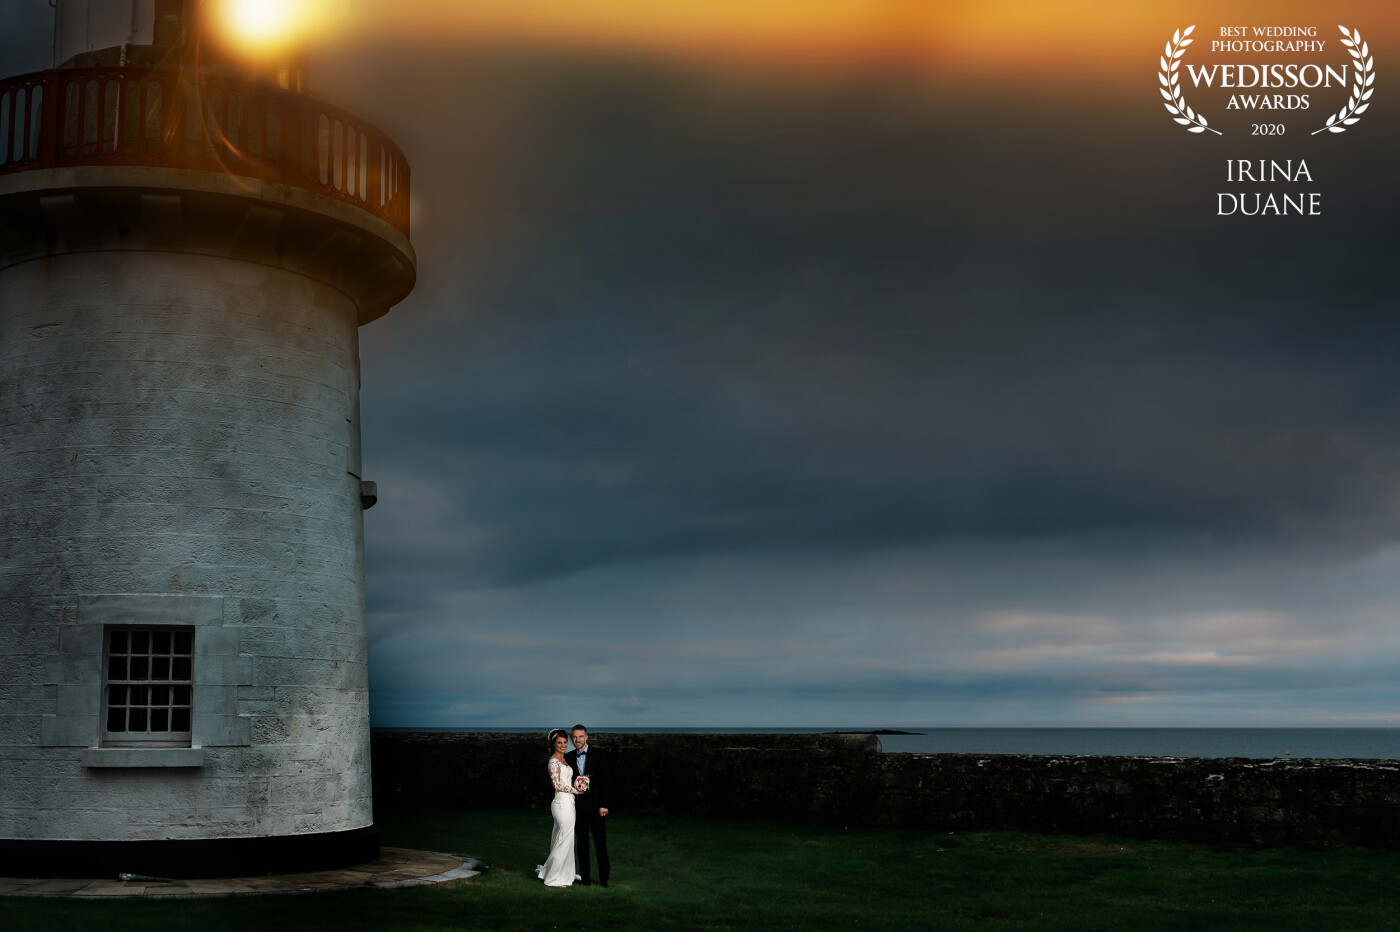 Ballinacourty Lighthouse offers an impressive and scenic backdrop. It located in the eastern Dungarvan Bay in county Waterford, Ireland and the first light flashed in 1858. When Sarah, the bride, asked me to photograph there I couldn't be more excited! I used a simple set up: one off-camera flash with a grid to highlight my couple. 